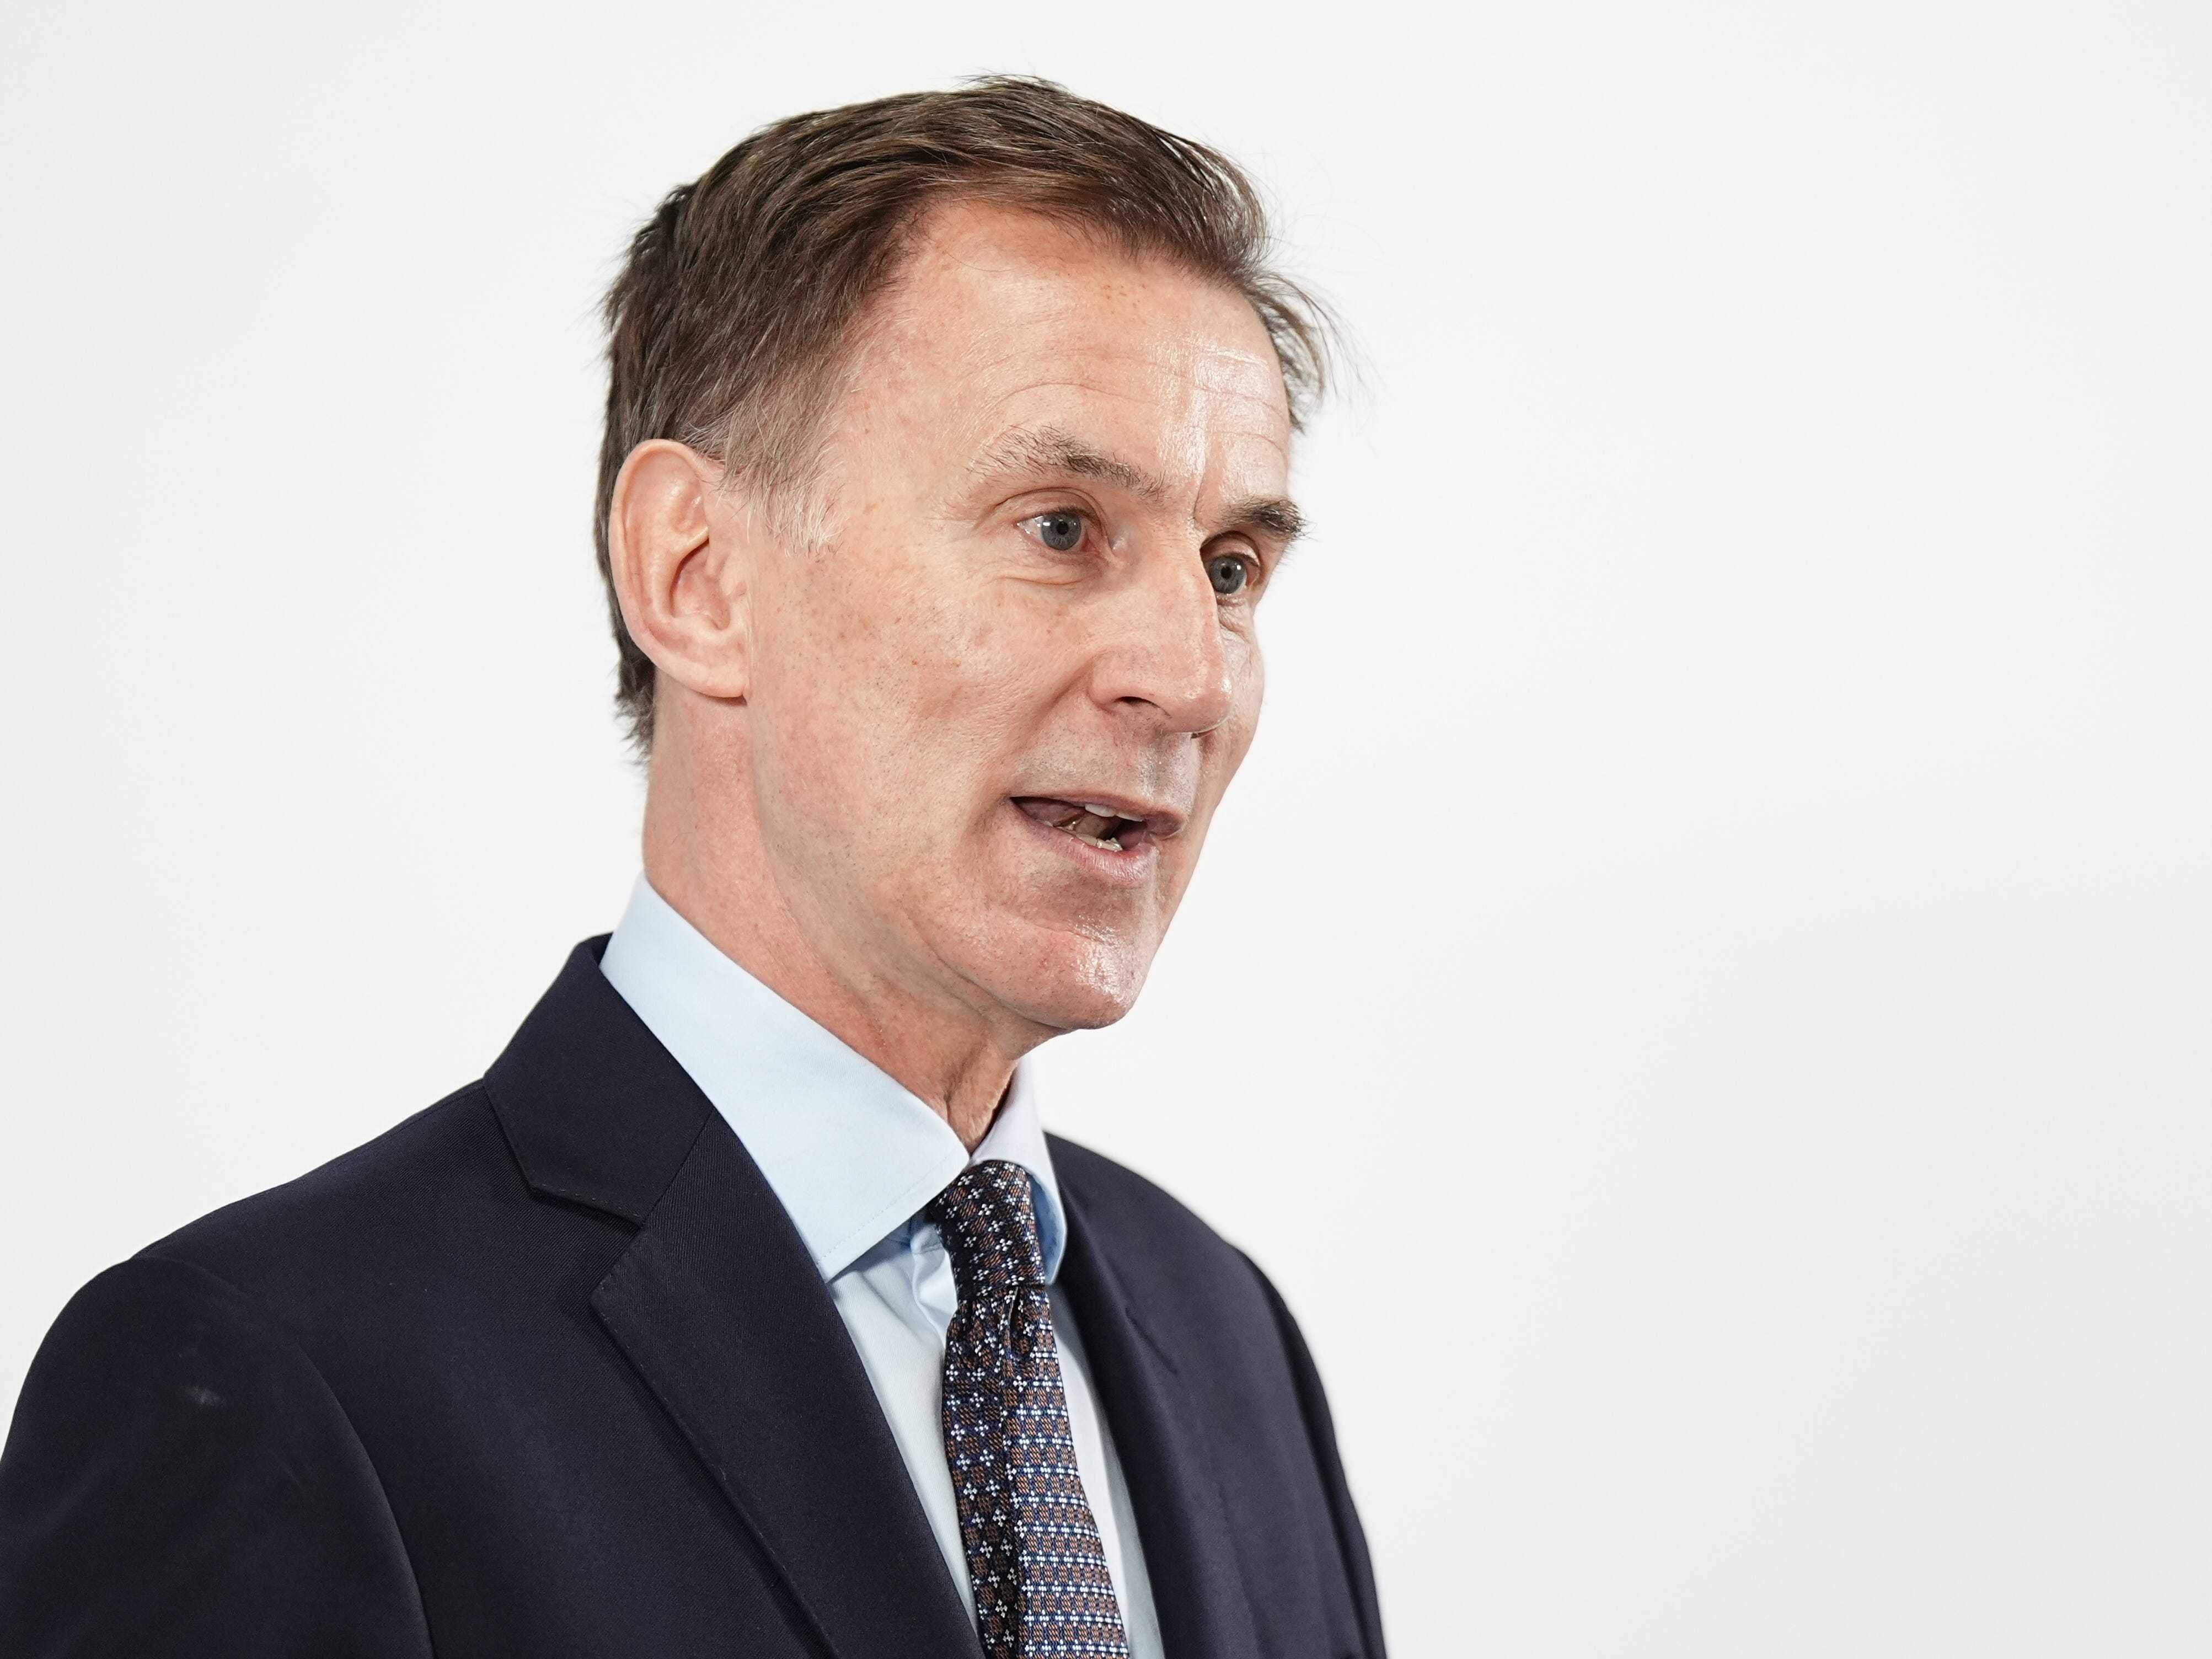 Hunt apologises for pandemic failings in wake of Covid inquiry report